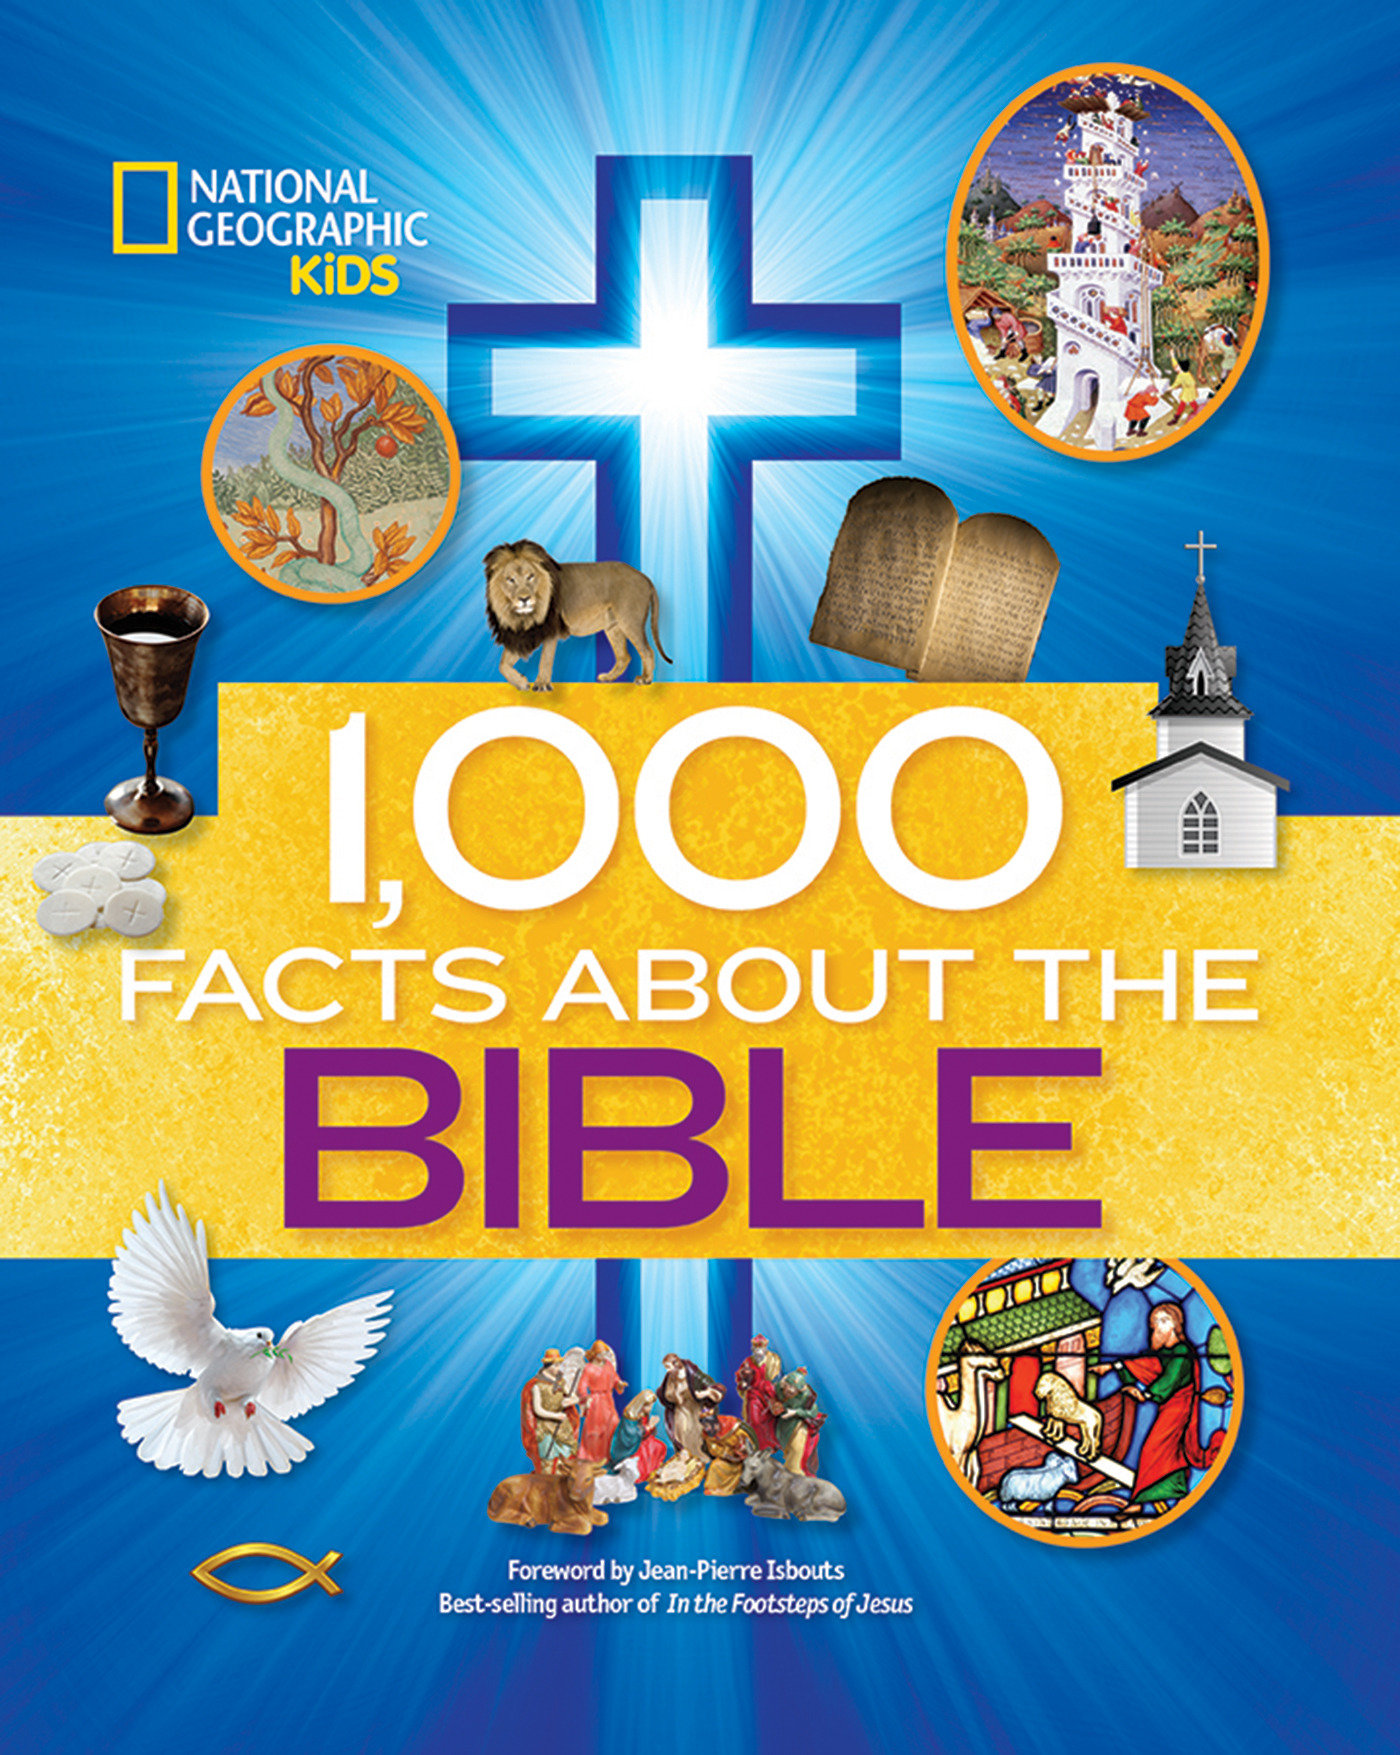 1,000 Facts About The Bible (Hardcover Book)